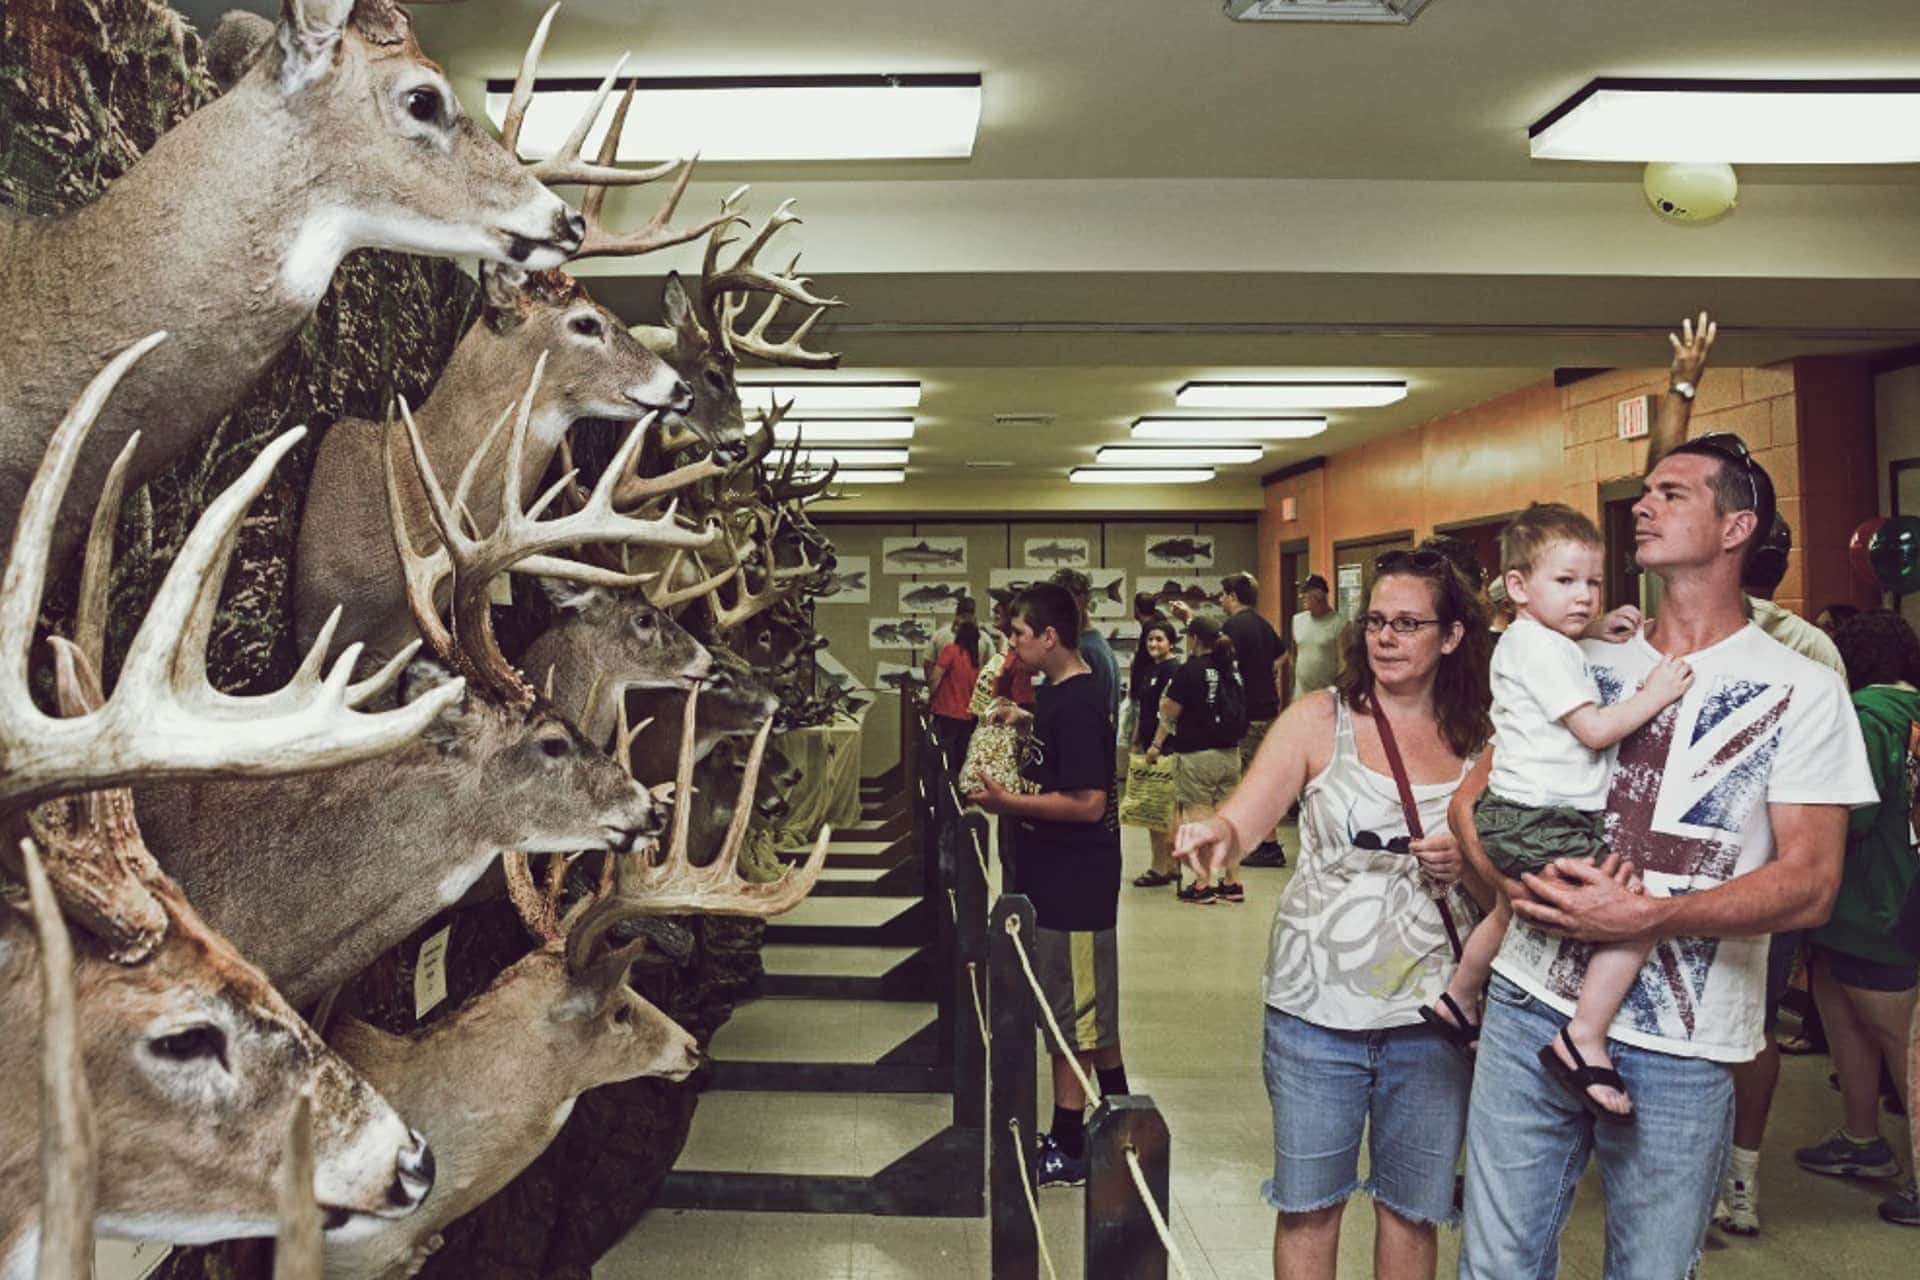 The Big Buck display is always a popular exhibit during the annual West Virginia Celebration of National Hunting and Fishing Day. This year's event is Sept. 21-22 at Stonewall Resort State Park.